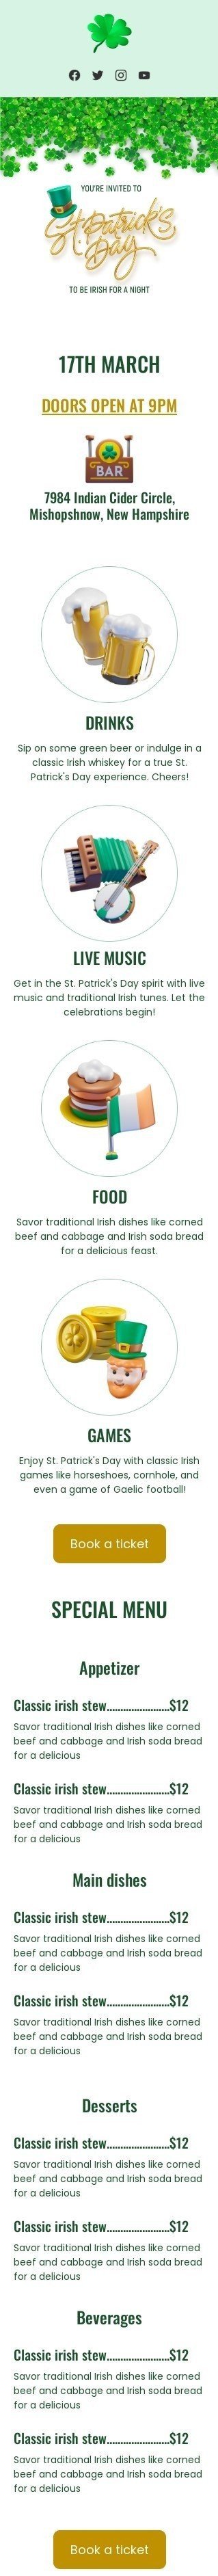 St. Patrick’s Day Email Template "To be irish for a night" for Restaurants industry mobile view